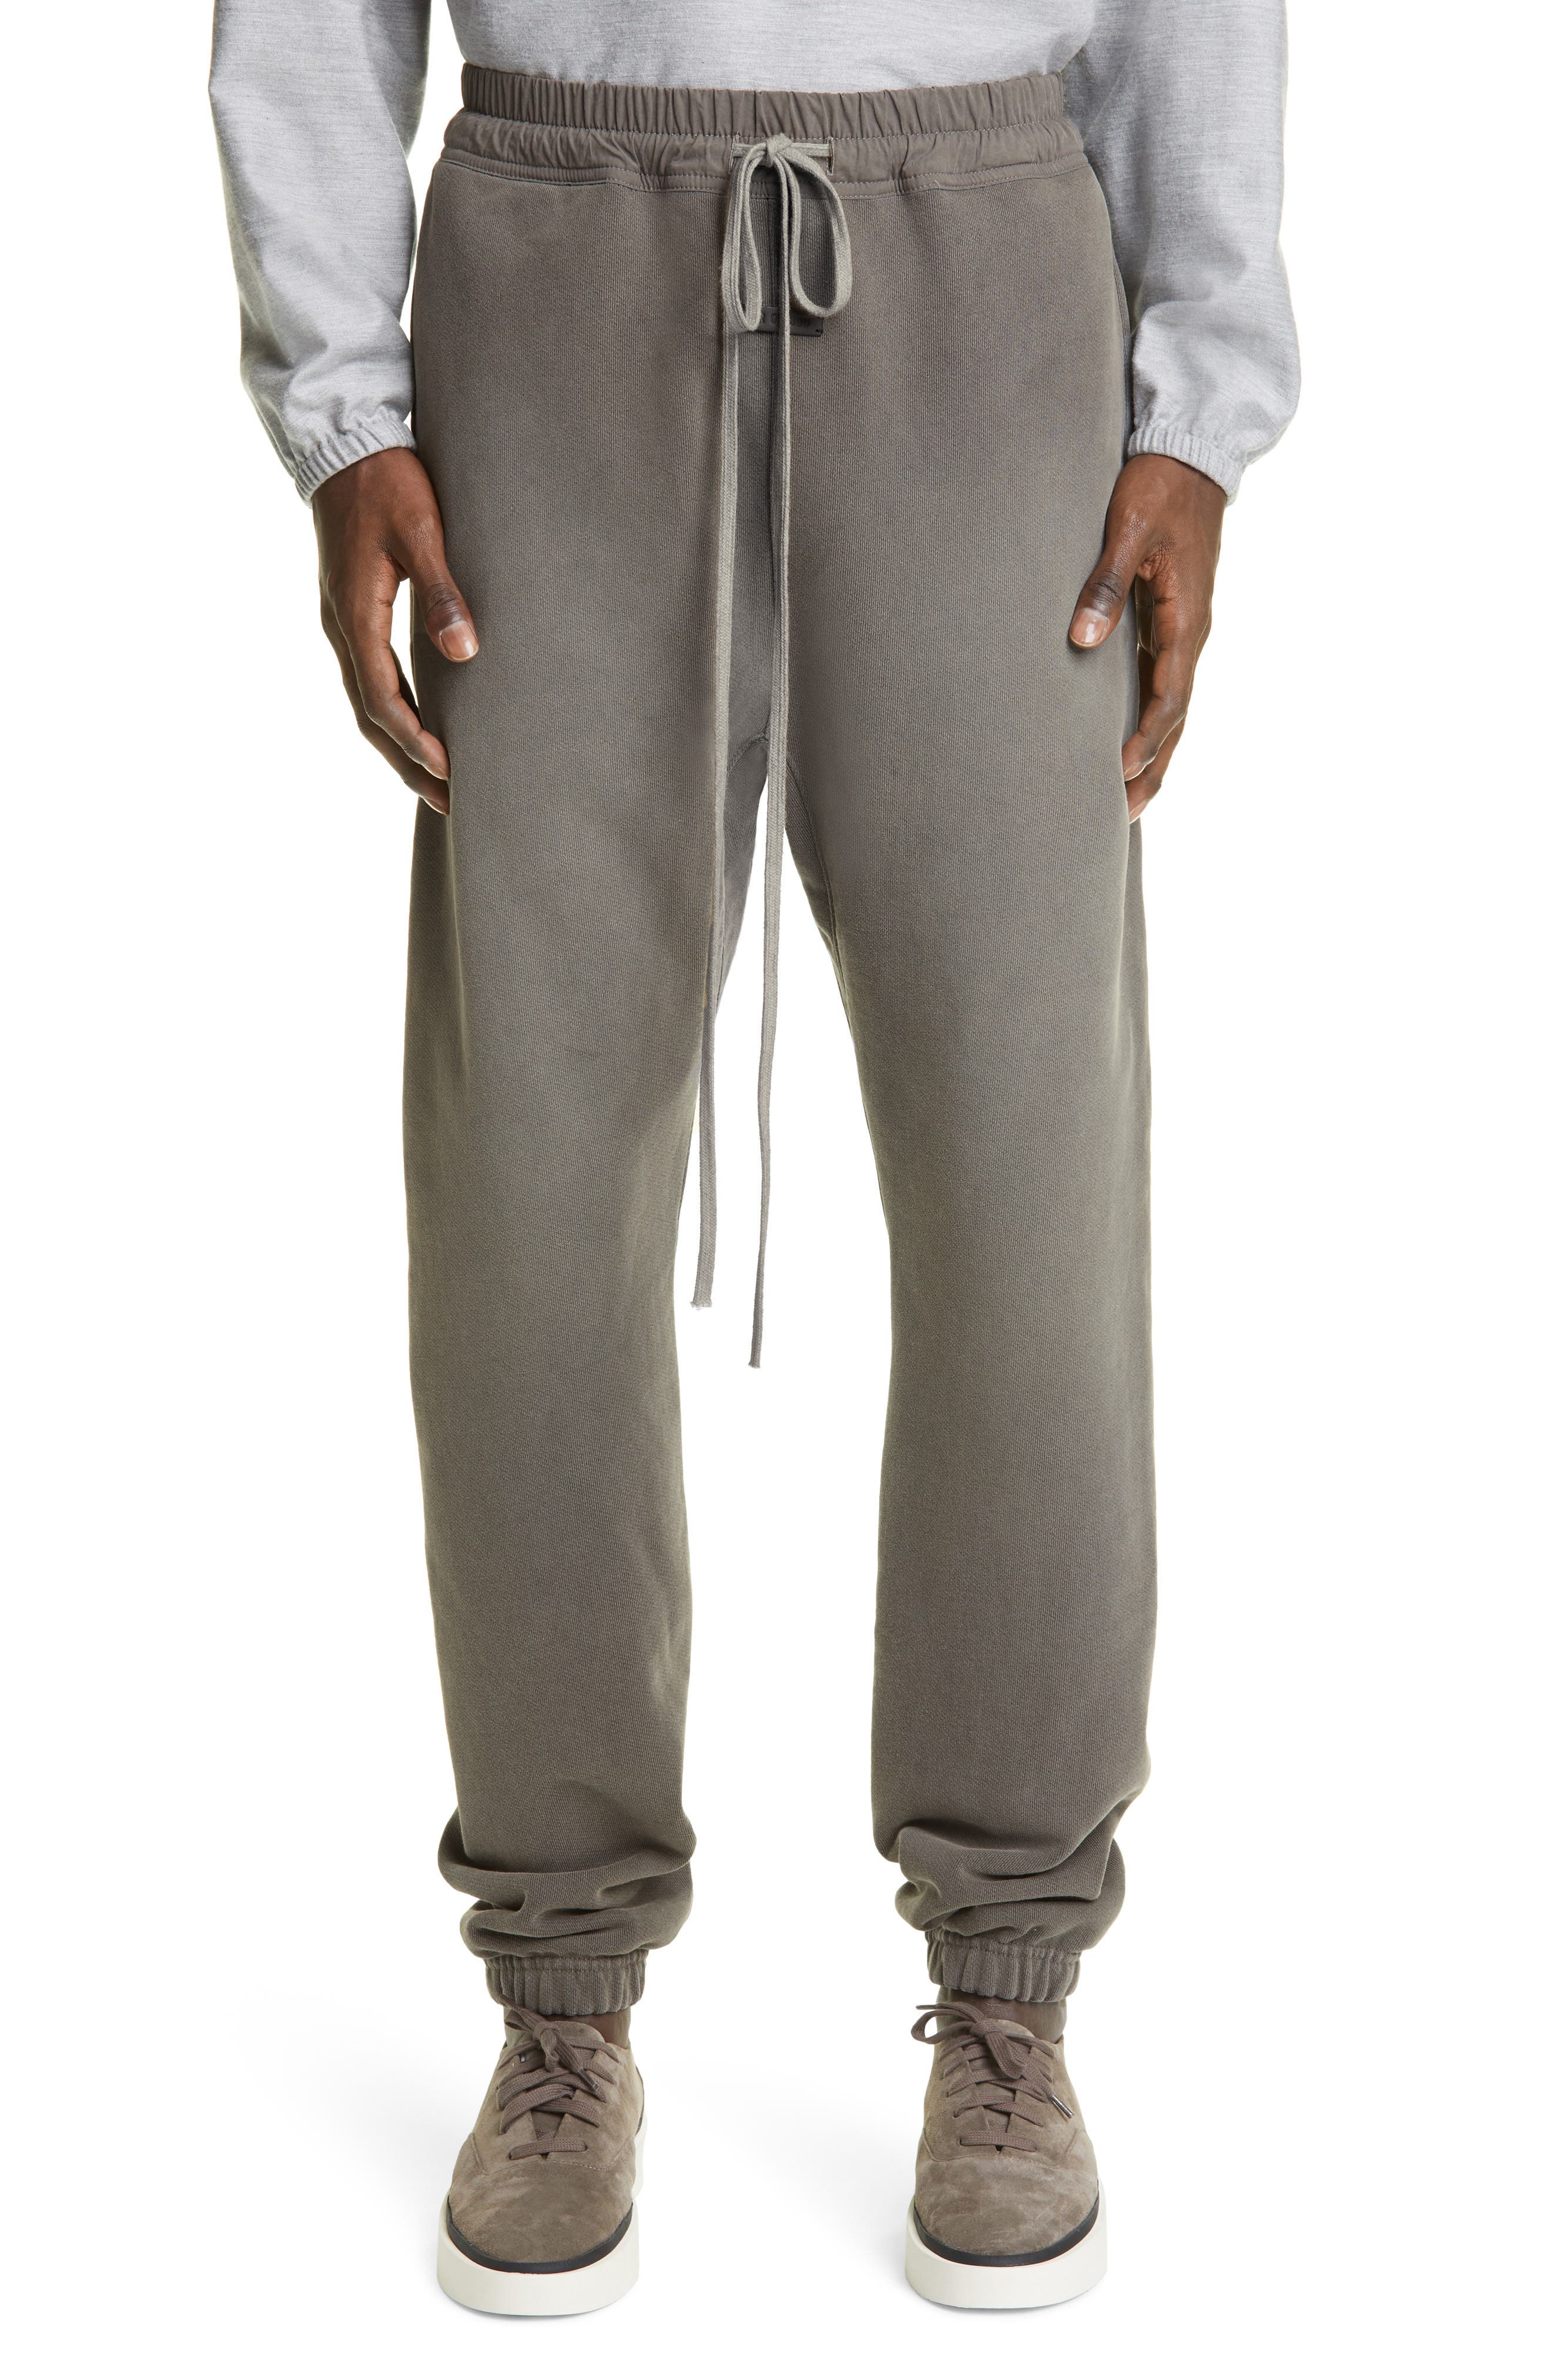 Fear of God The Vintage Sweatpants in Vintage Cement at Nordstrom, Size Large